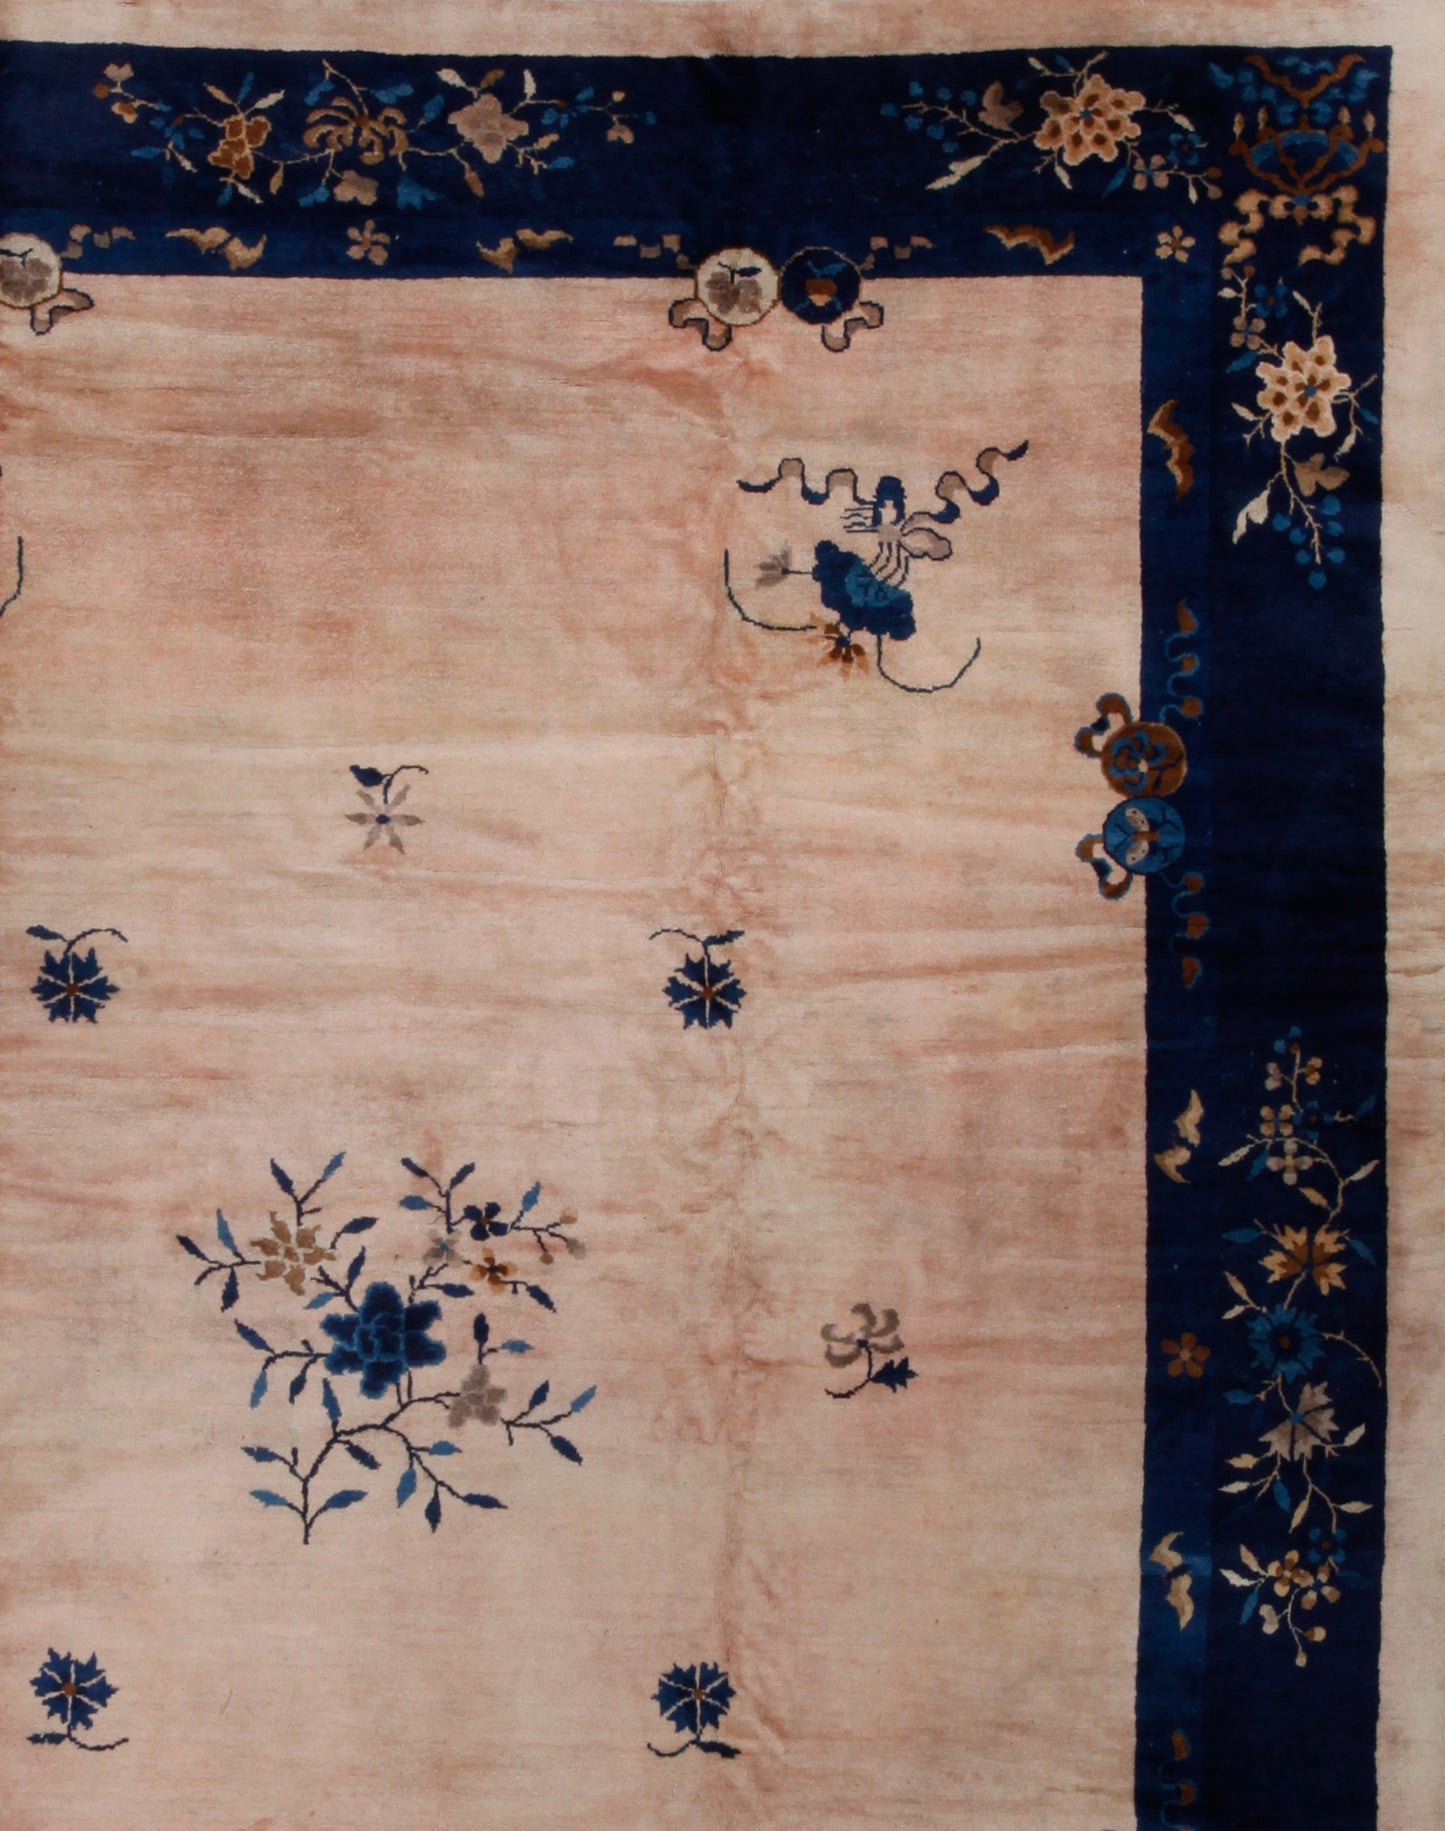 The top right corner shows this thick royal blue with some beige flowers.